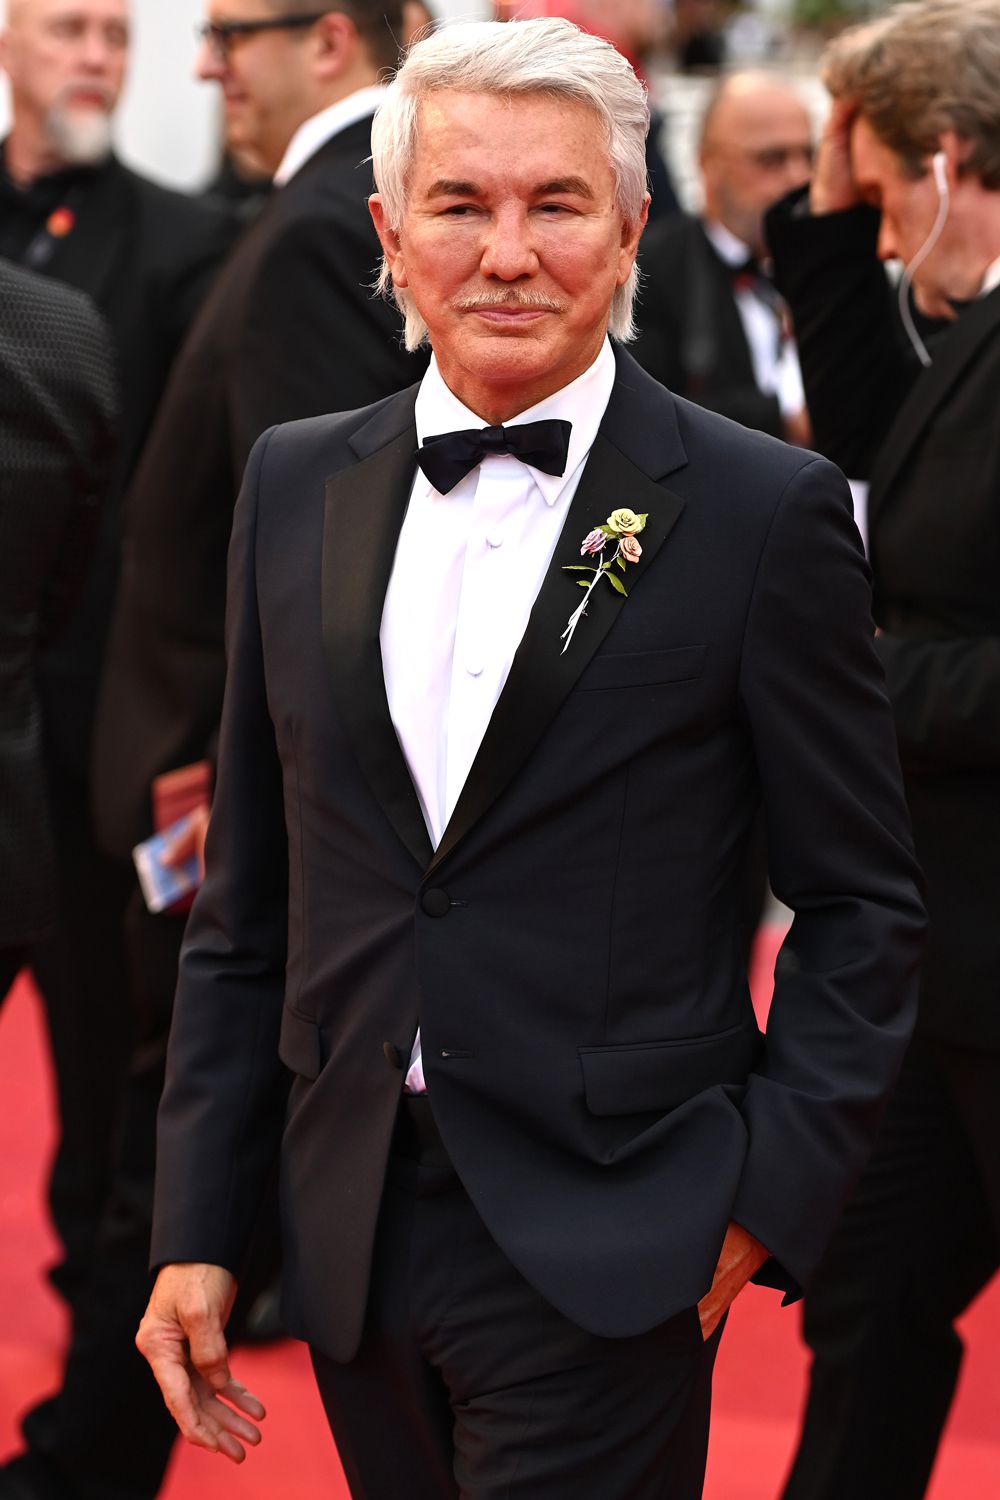 Baz Luhrmann attends the screening of the movie "Furiosa: A Mad Max Saga" at the 77th annual Cannes Film Festival 